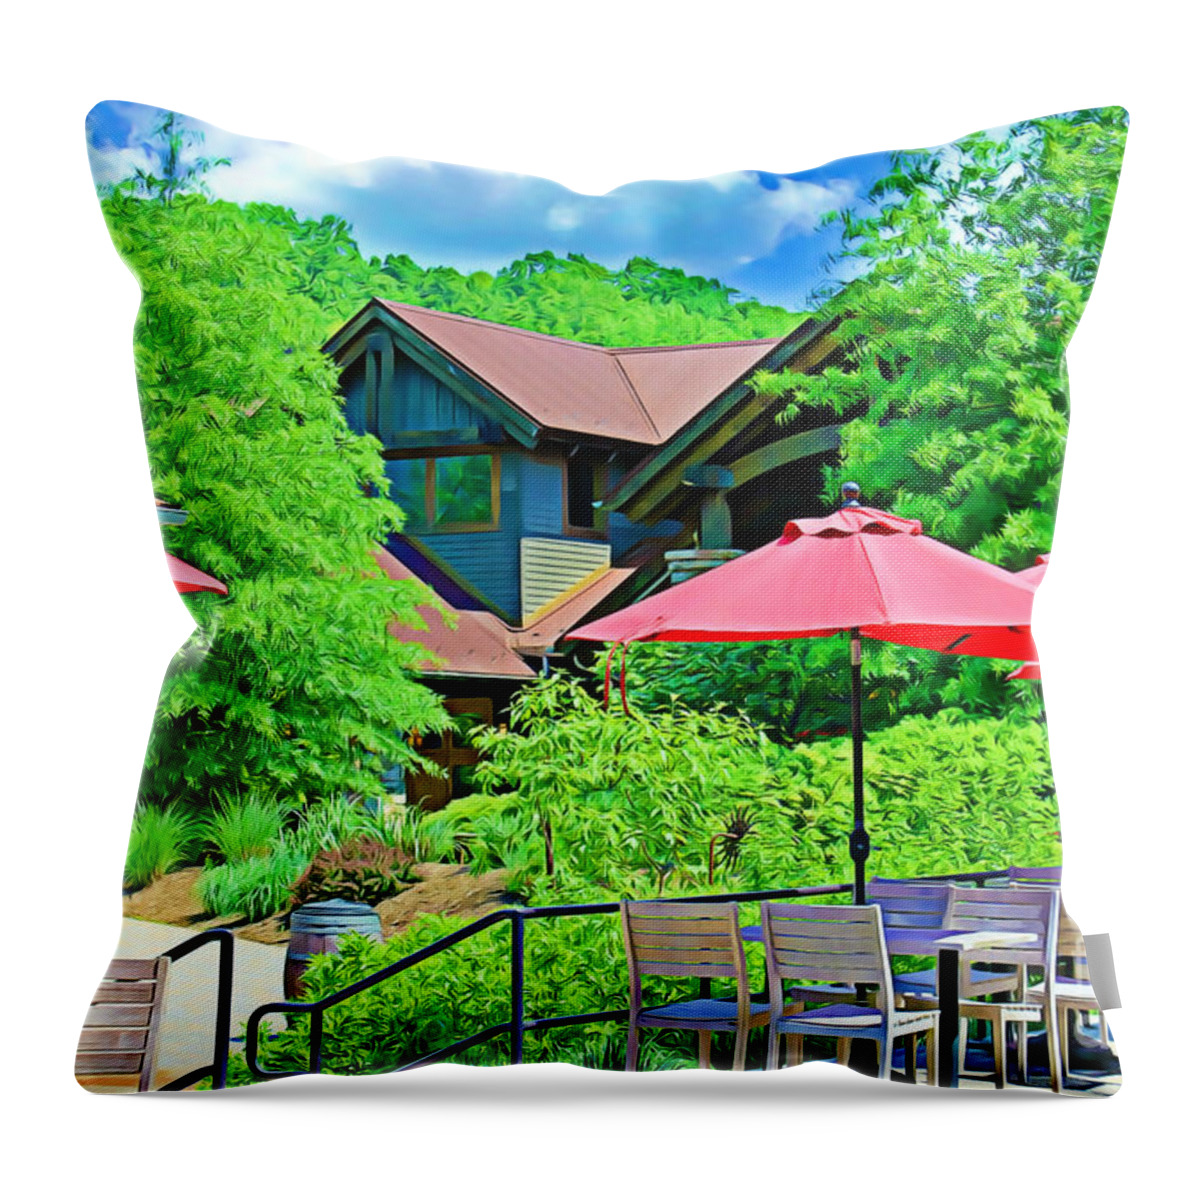 Landscape Throw Pillow featuring the digital art Spring Day In Virginia by Judy Palkimas